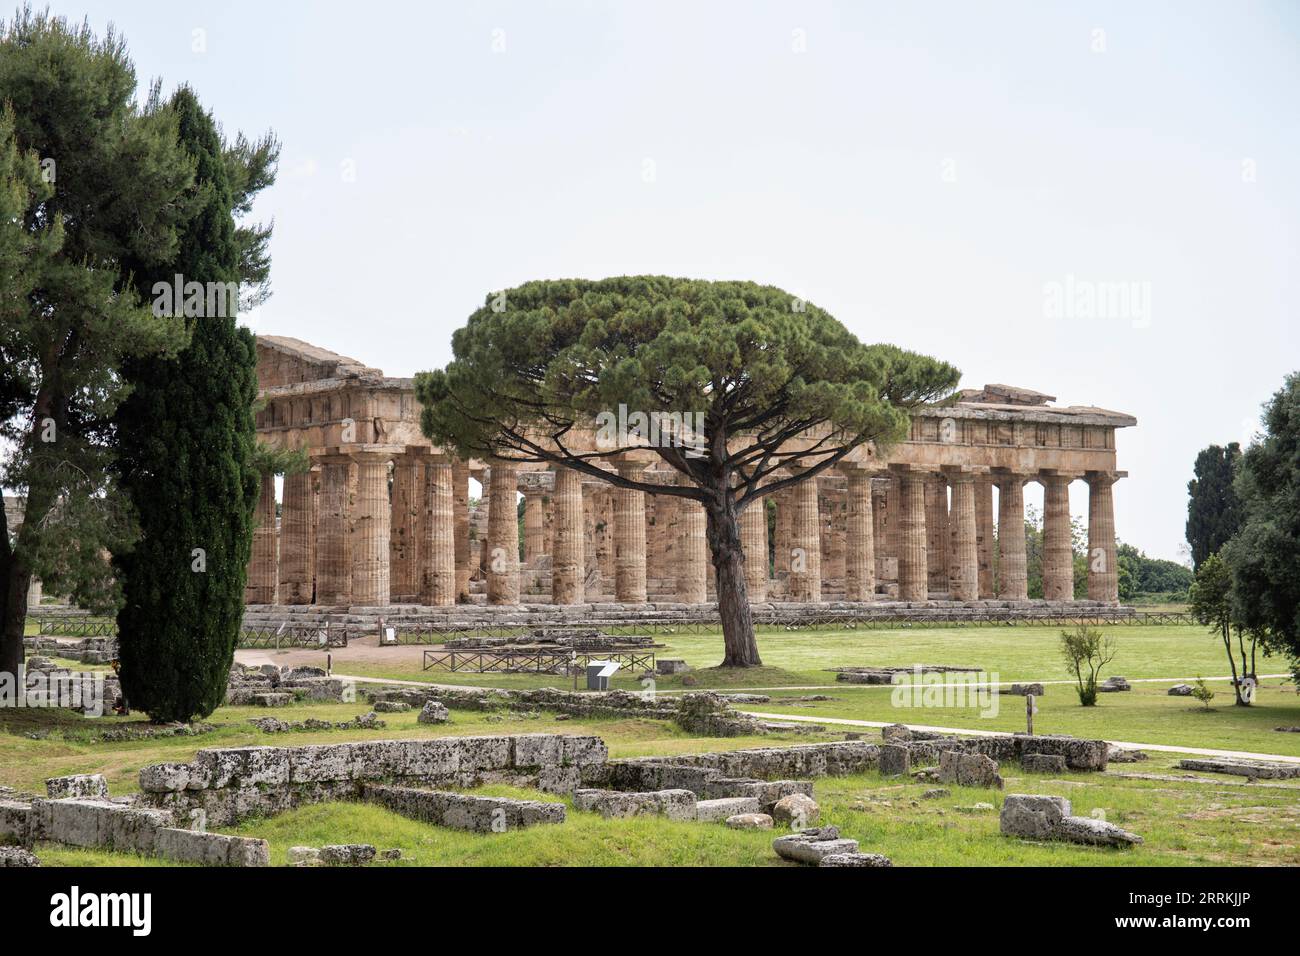 Paestum Archaeological Park, beautiful historical ruins of temples from the Roman period, Campania, Salerno, Italy Stock Photo